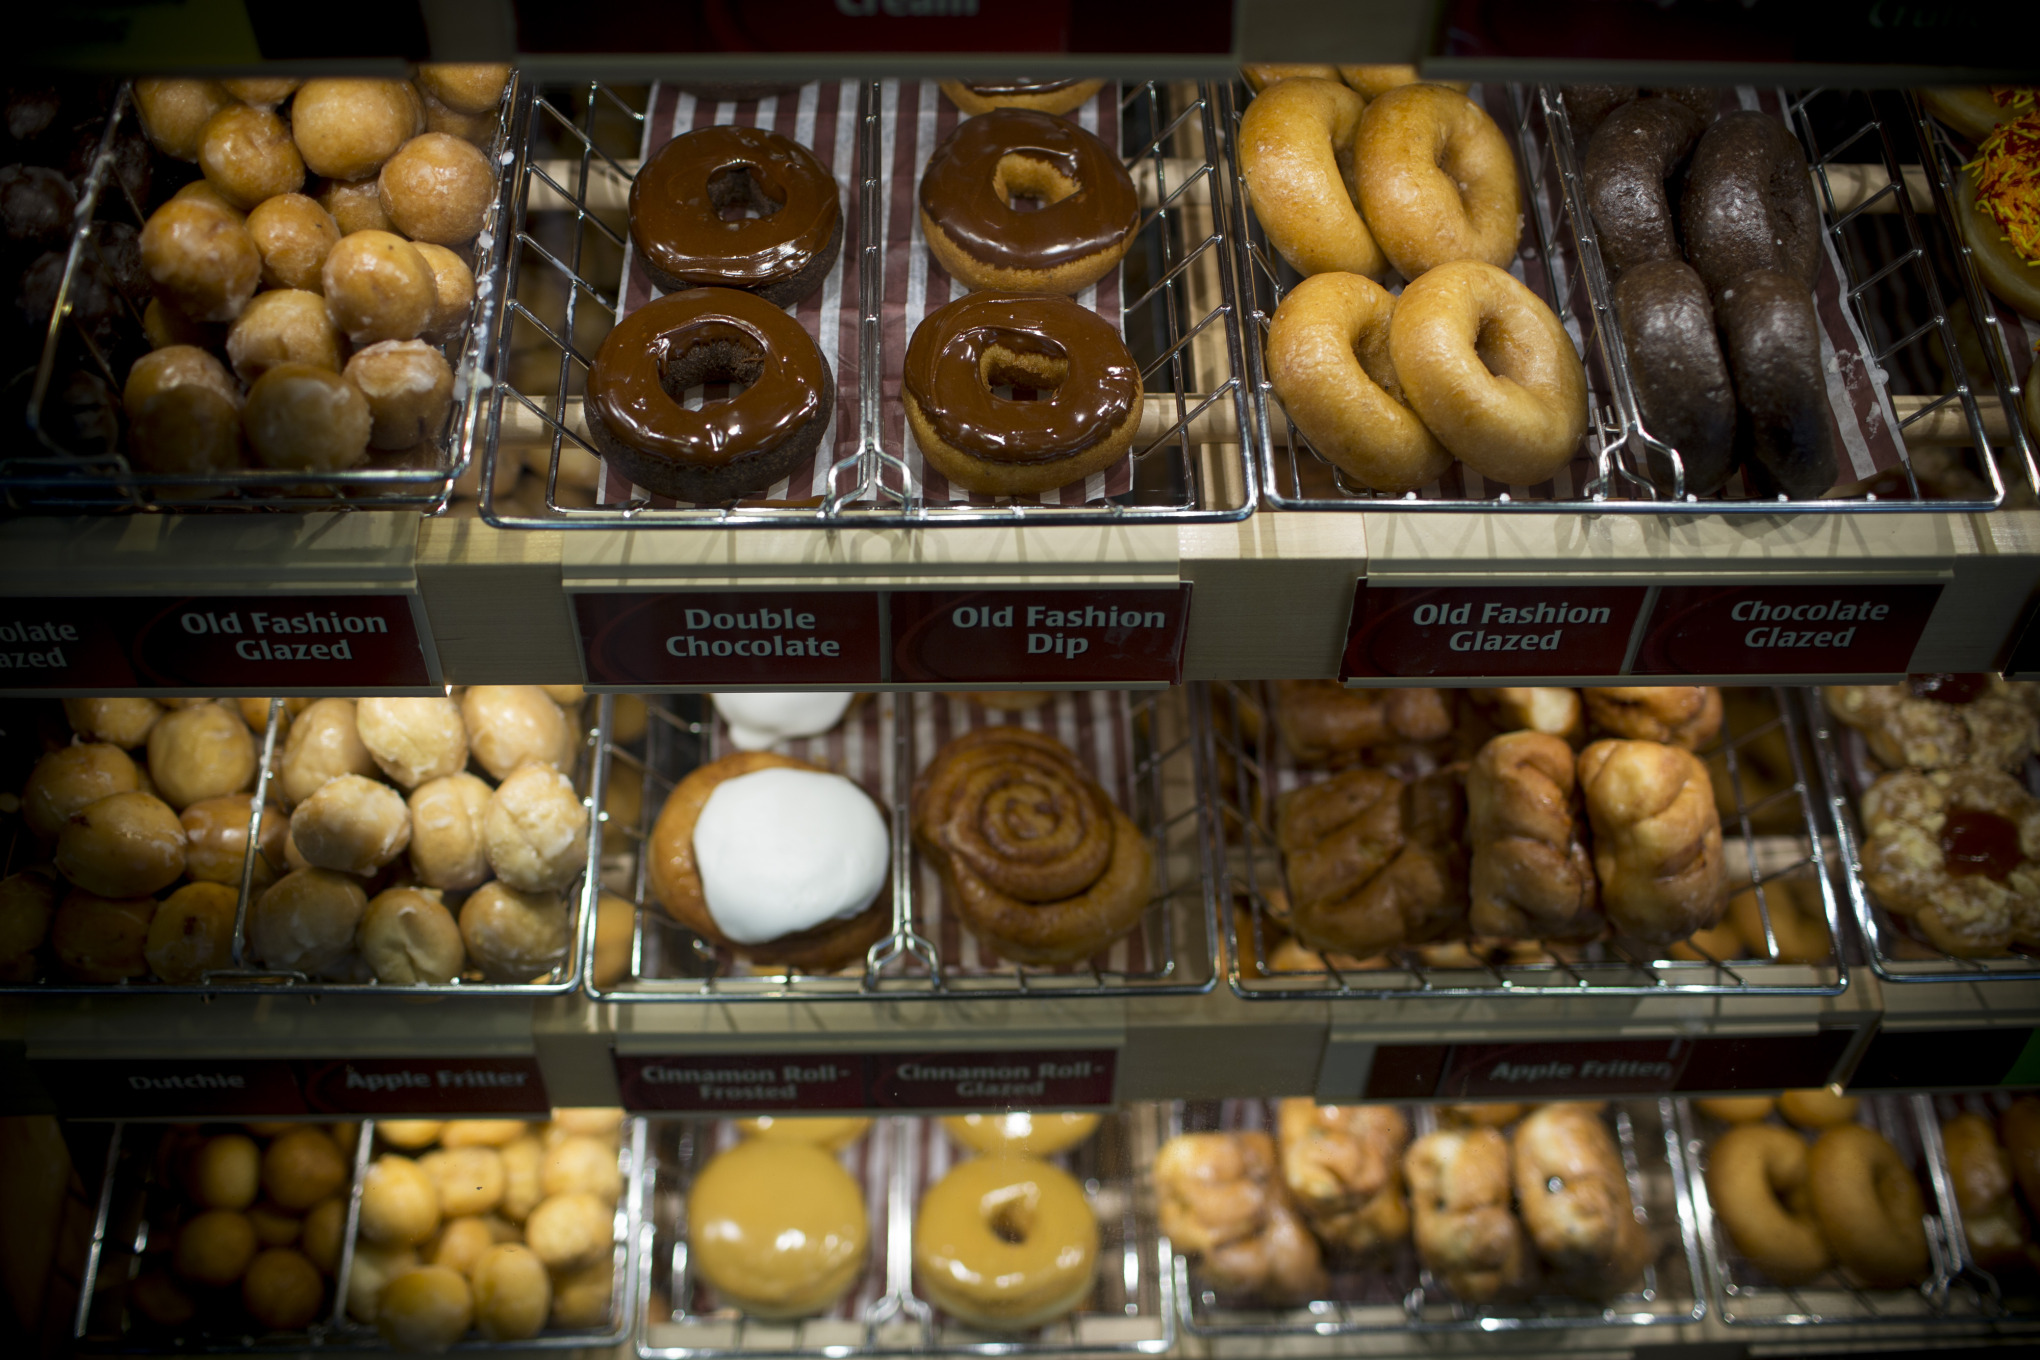 Tim Hortons aiming to keep growth going